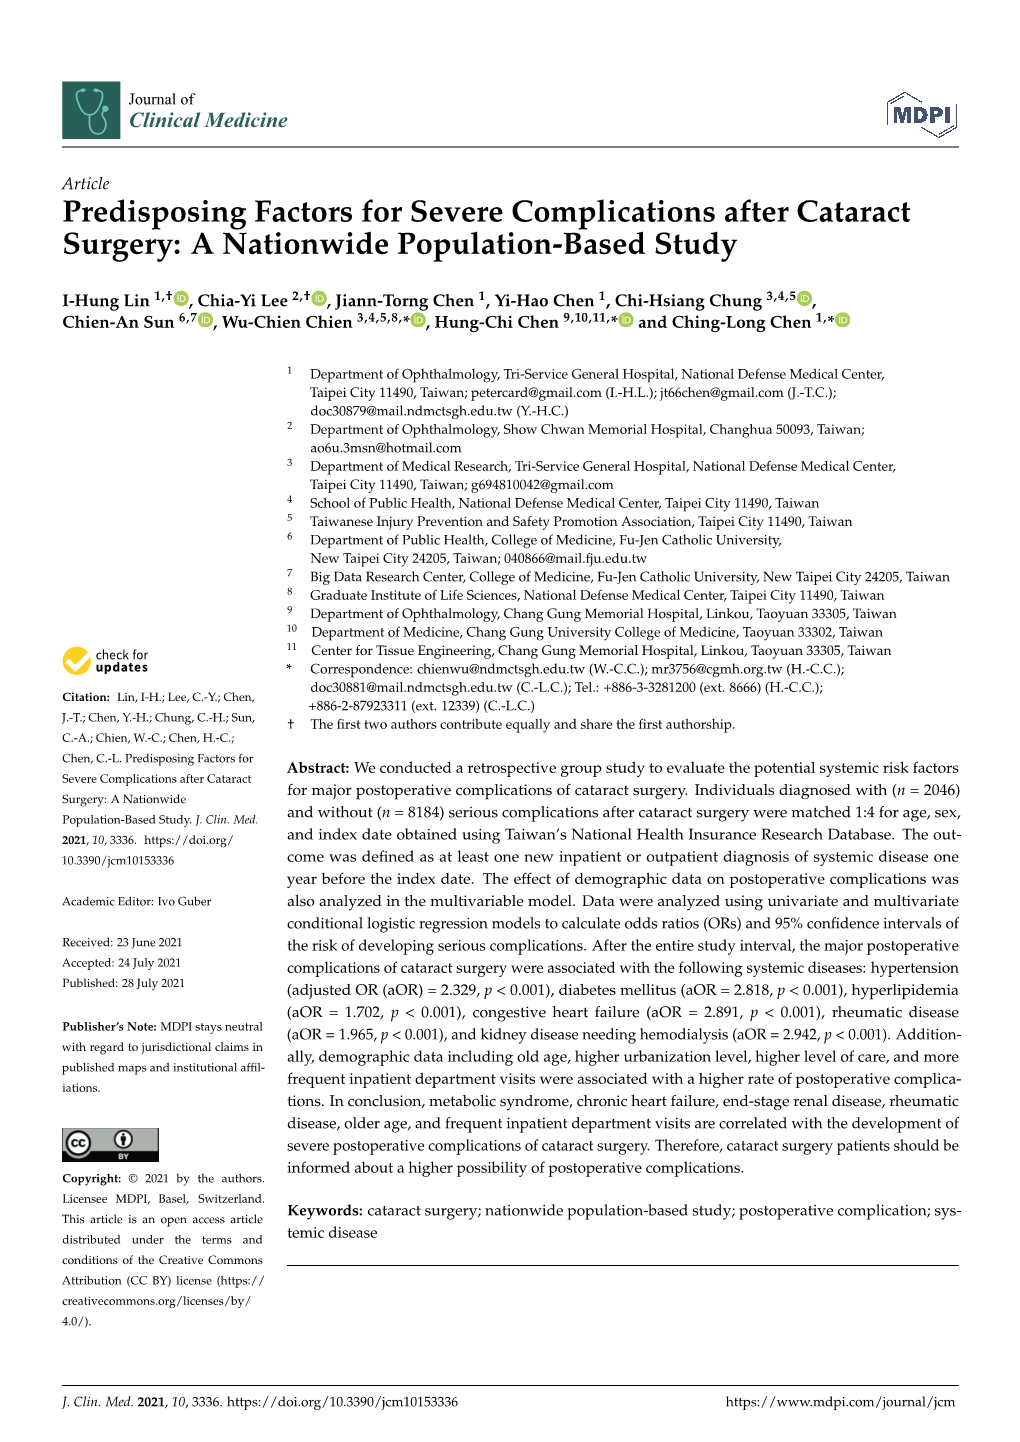 Predisposing Factors for Severe Complications After Cataract Surgery: a Nationwide Population-Based Study